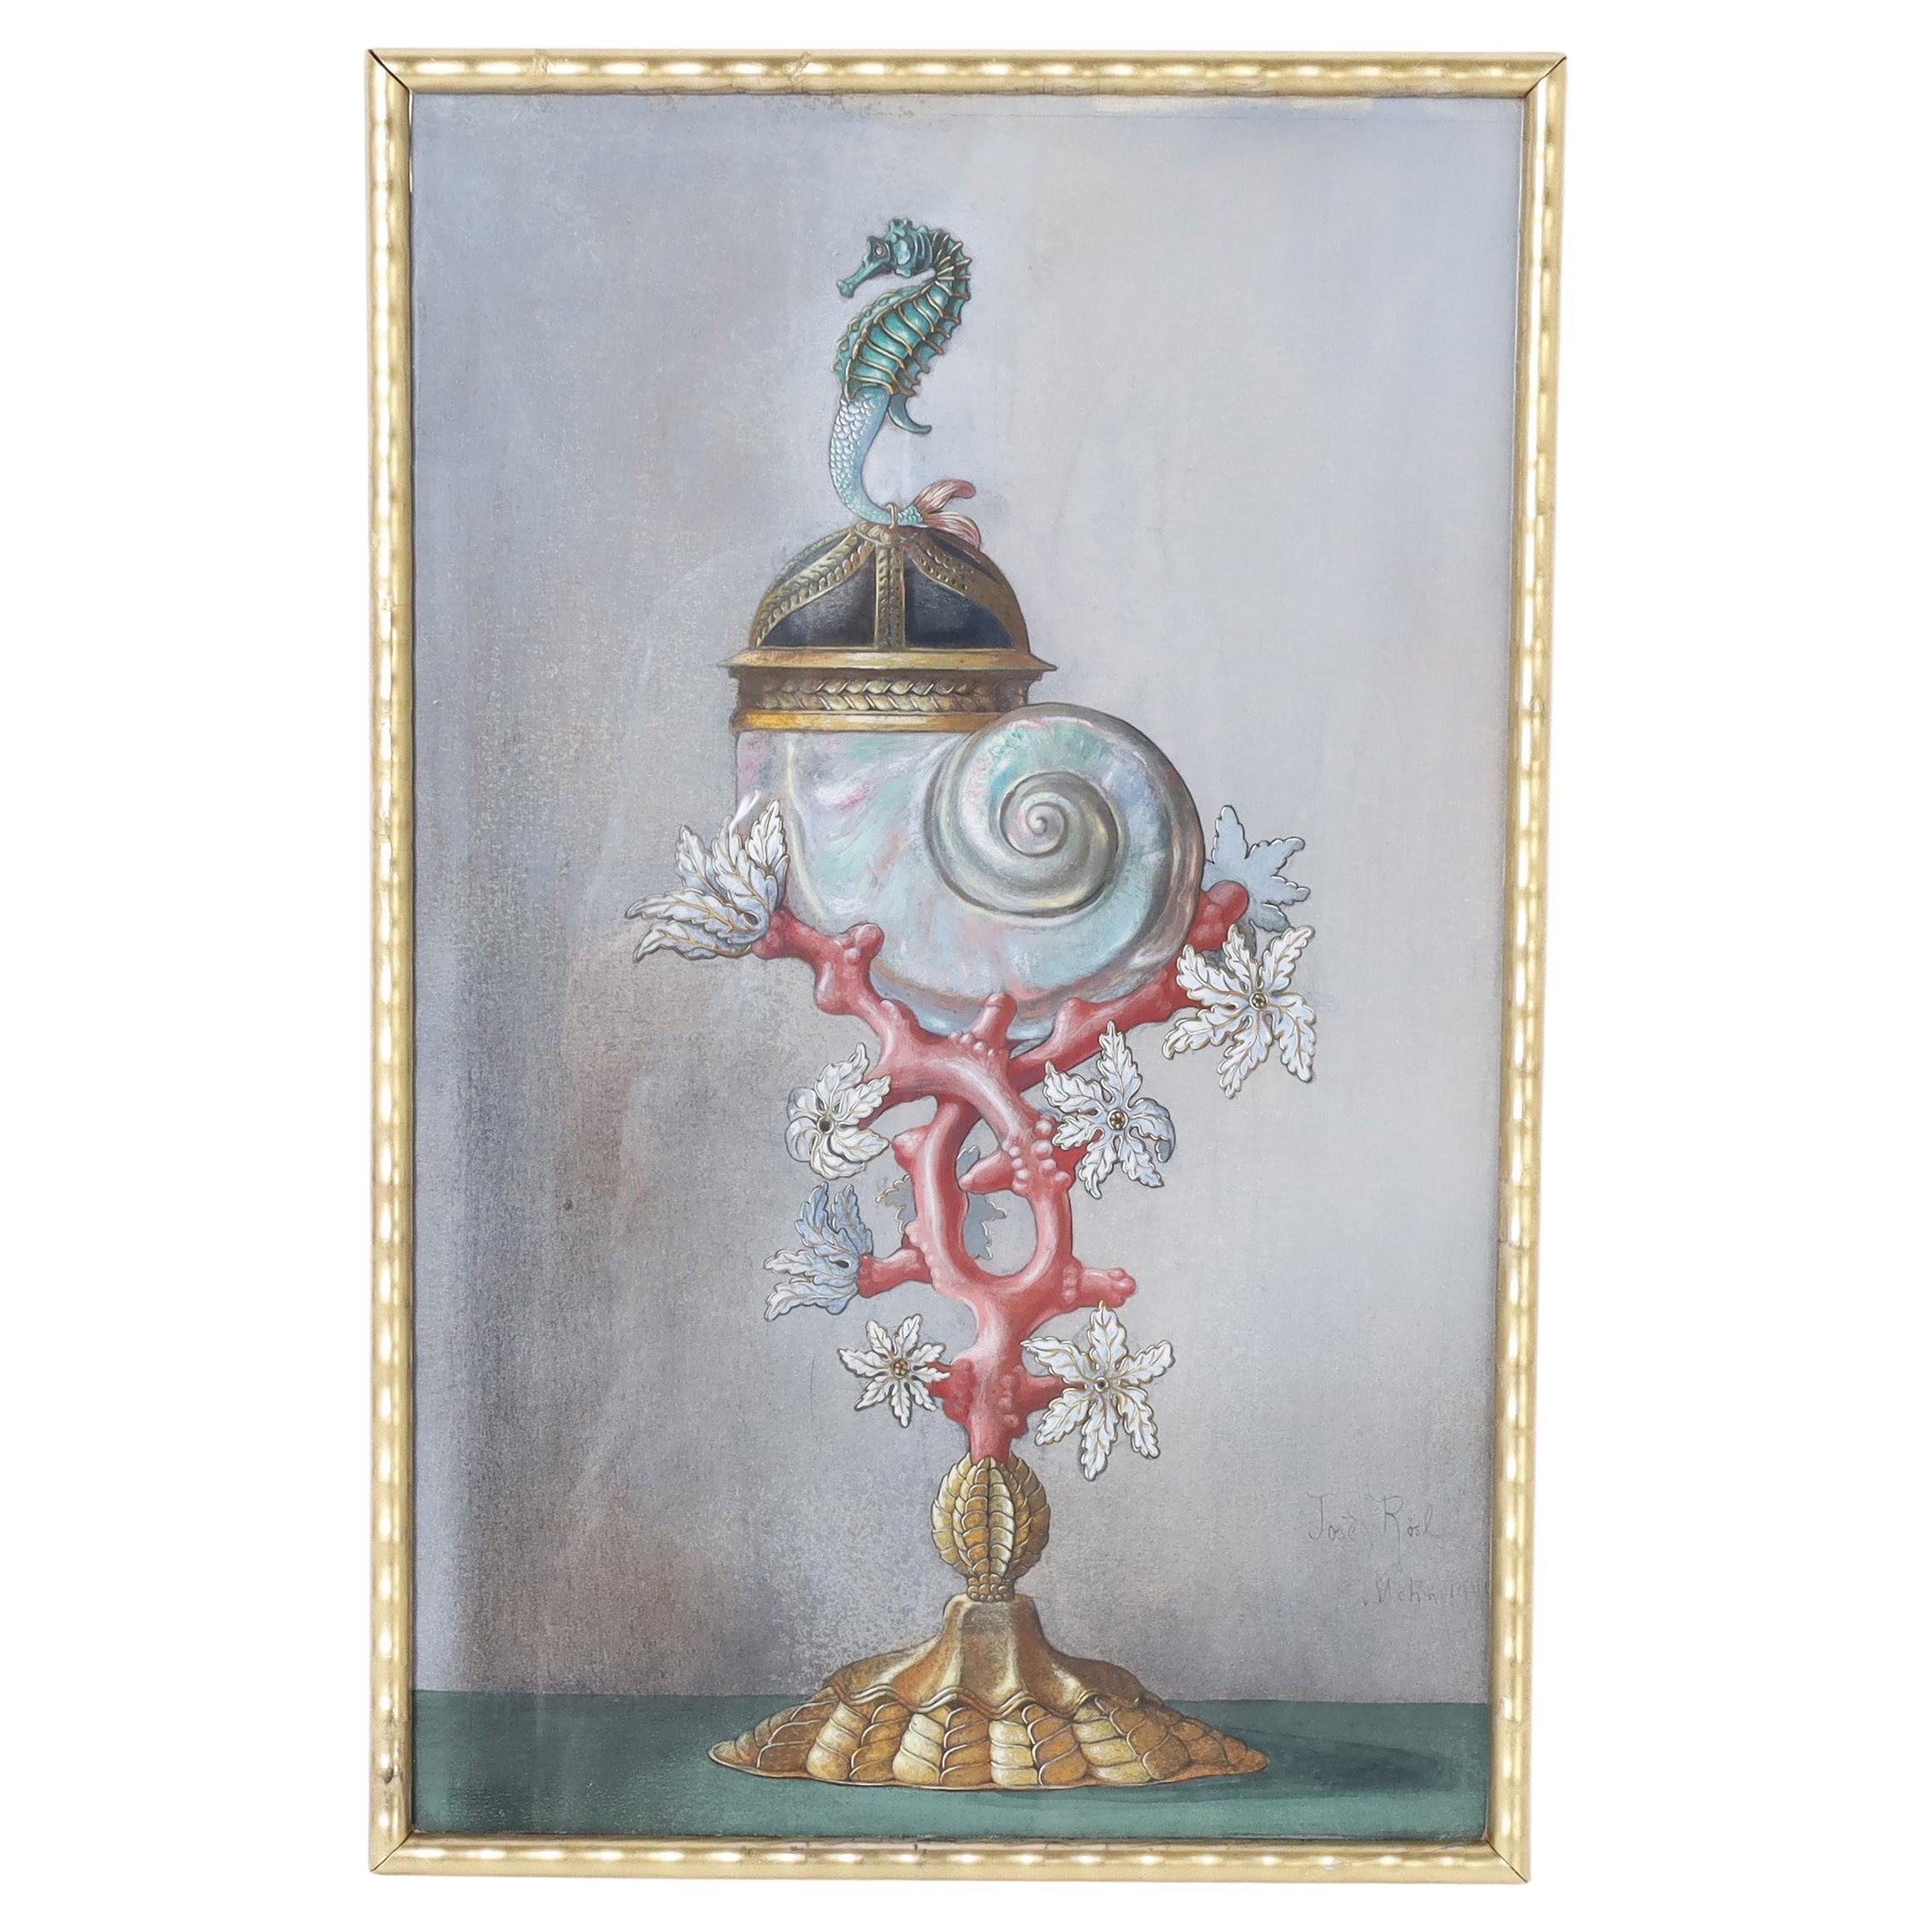 Vintage Watercolor of a Fantastical Center Piece with Seahorse and Coral